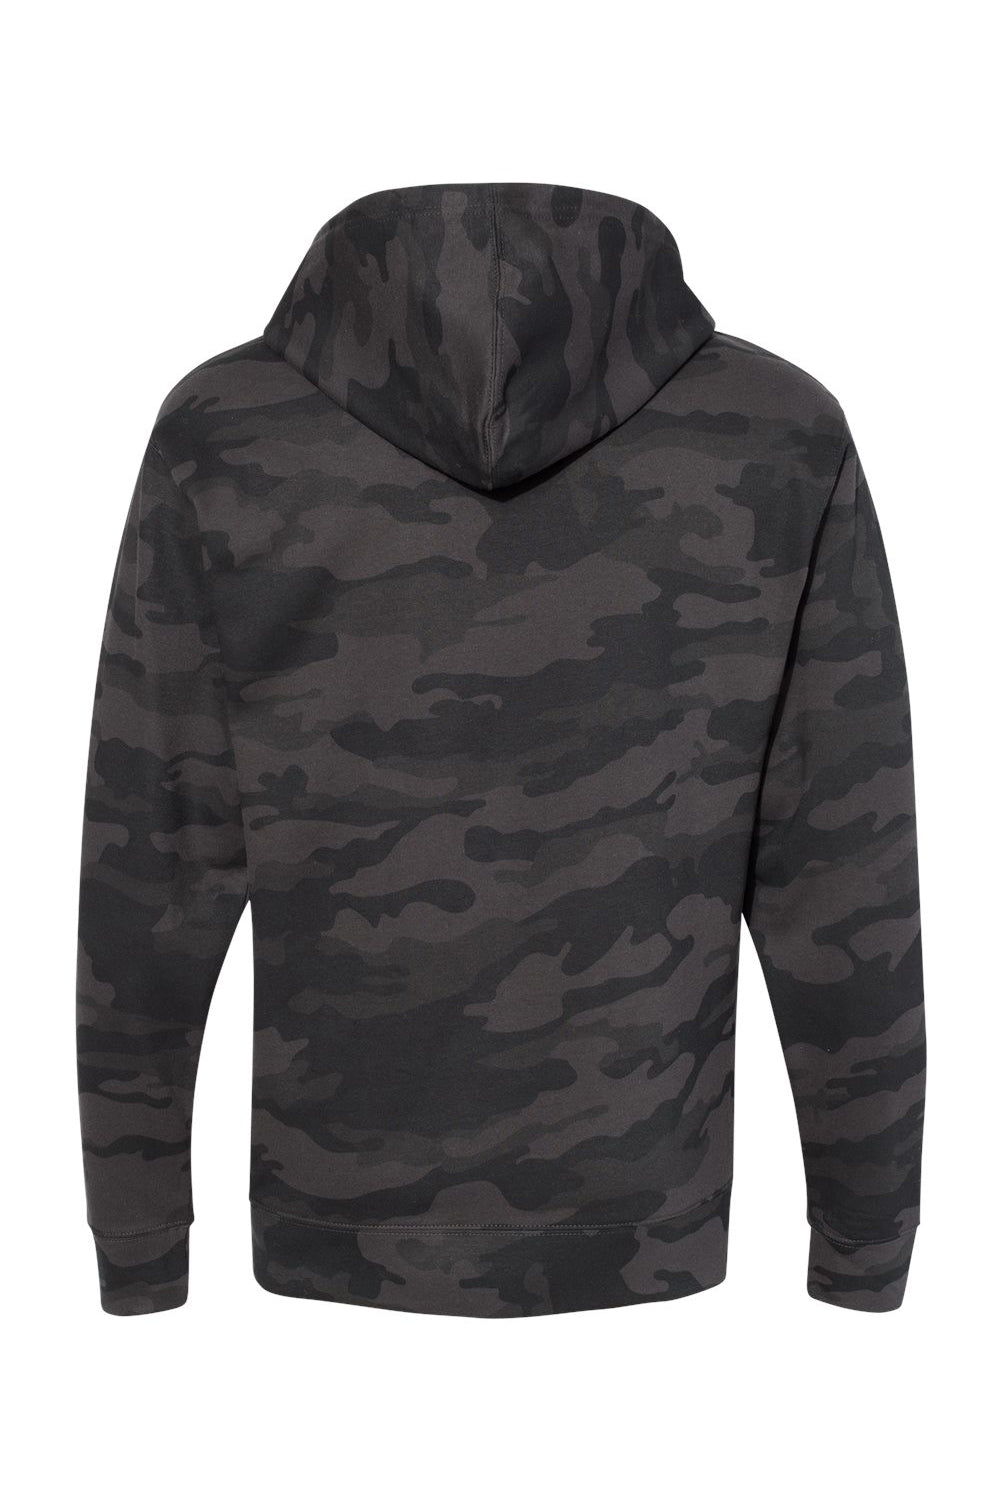 Independent Trading Co. SS4500 Mens Hooded Sweatshirt Hoodie Black Camo Flat Back